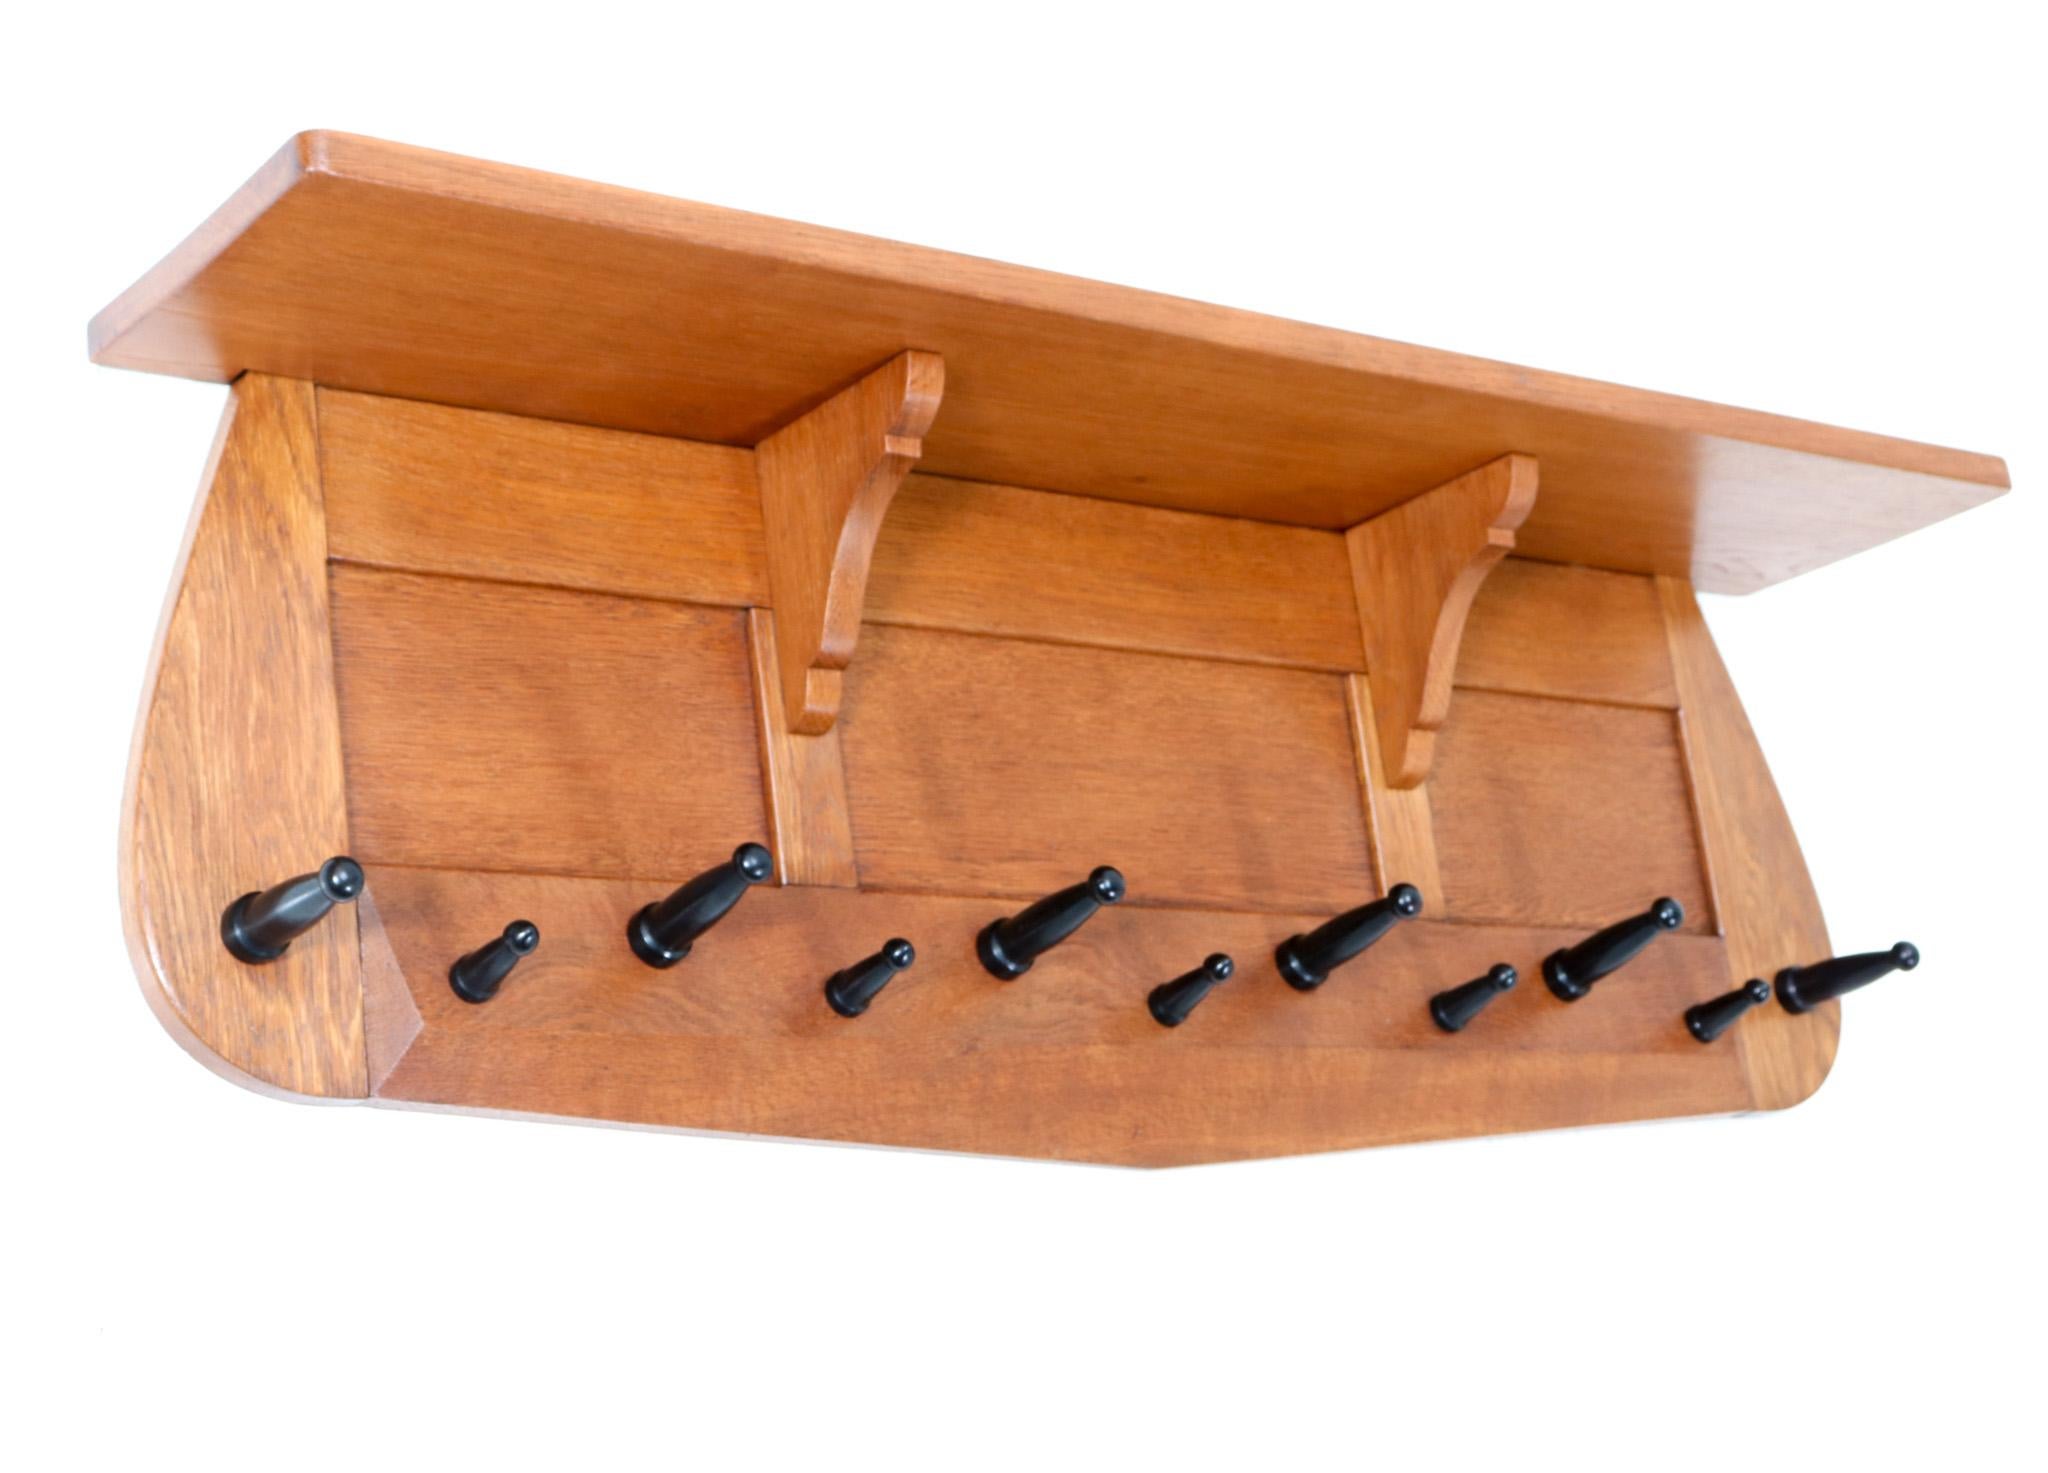 Stunning and rare Art Deco Amsterdamse School wall coat rack.
Design in the style of Paul Bromberg.
Striking Dutch design from the 1920s.
Solid oak frame with eleven original black lacquered wooden hooks.
This wonderful Art Deco Amsterdamse